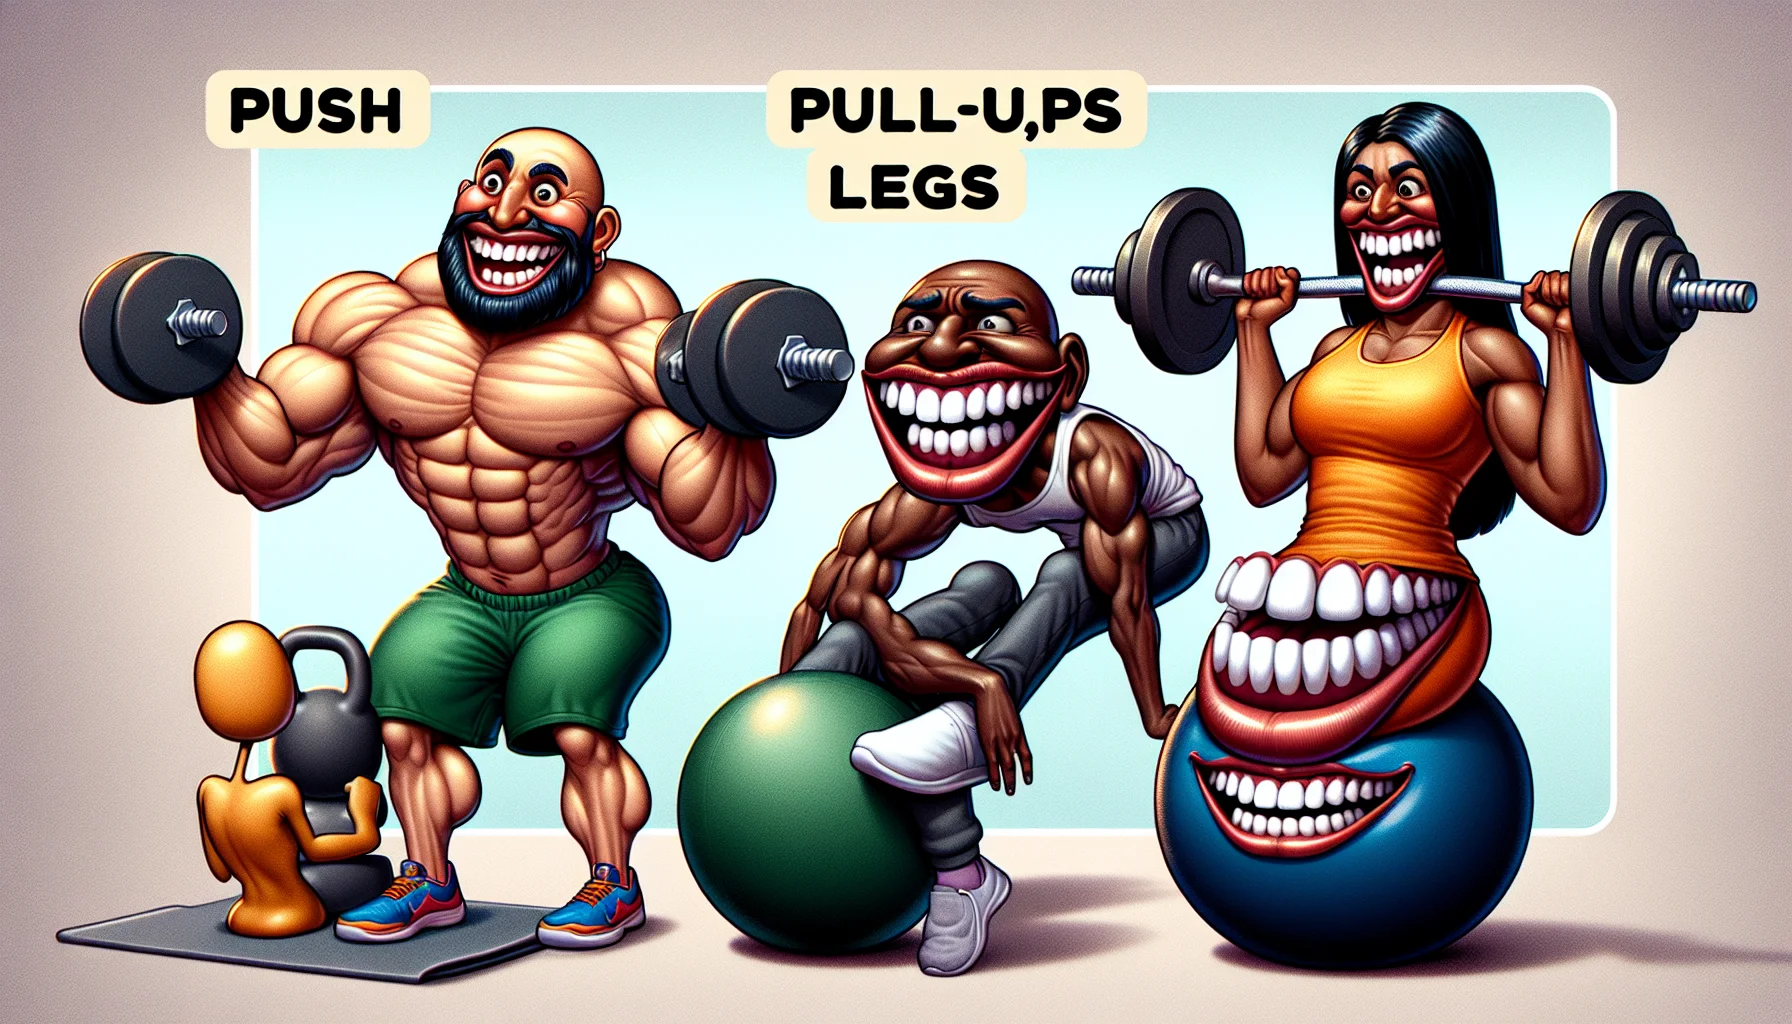 Design a humorously enticing image illustrating the concept of push pull legs calisthenics. Capture three scenes, each showcasing a different exercise: push-ups, pull-ups, and squats. Firstly, show a comically exaggerated, muscular South Asian female performing push-ups, with an animated dumbbell eagerly cheering her on. In the next scene, depict a gap-toothed kettlebell humorously grimacing as a Middle Eastern man confidently performs pull-ups. Lastly, have a jolly Black woman performing squats, with a smirking stability ball acting as her whimsical companion. By encapsulating this humorous fitness theme, capture the fun side of calisthenics.